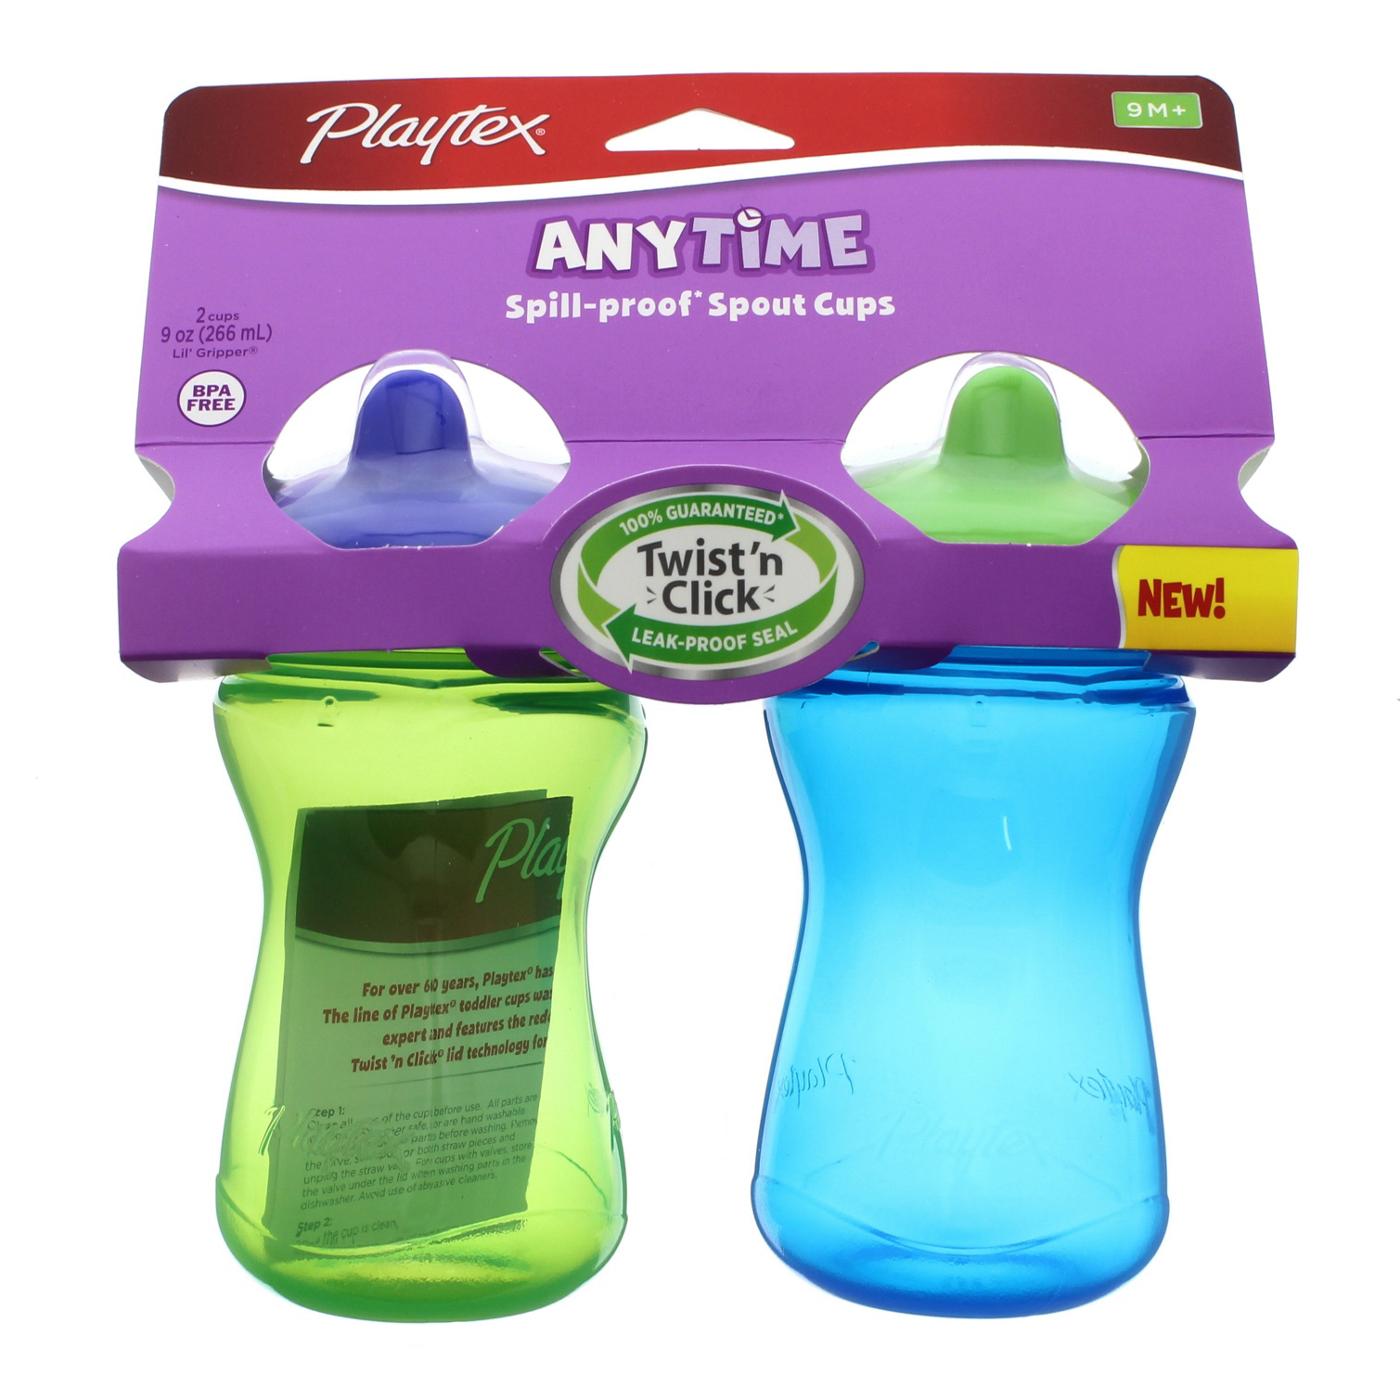 Playtex AnyTime Spill-Proof Spout Cups 9 OZ (9M +), Assorted Colors; image 1 of 2